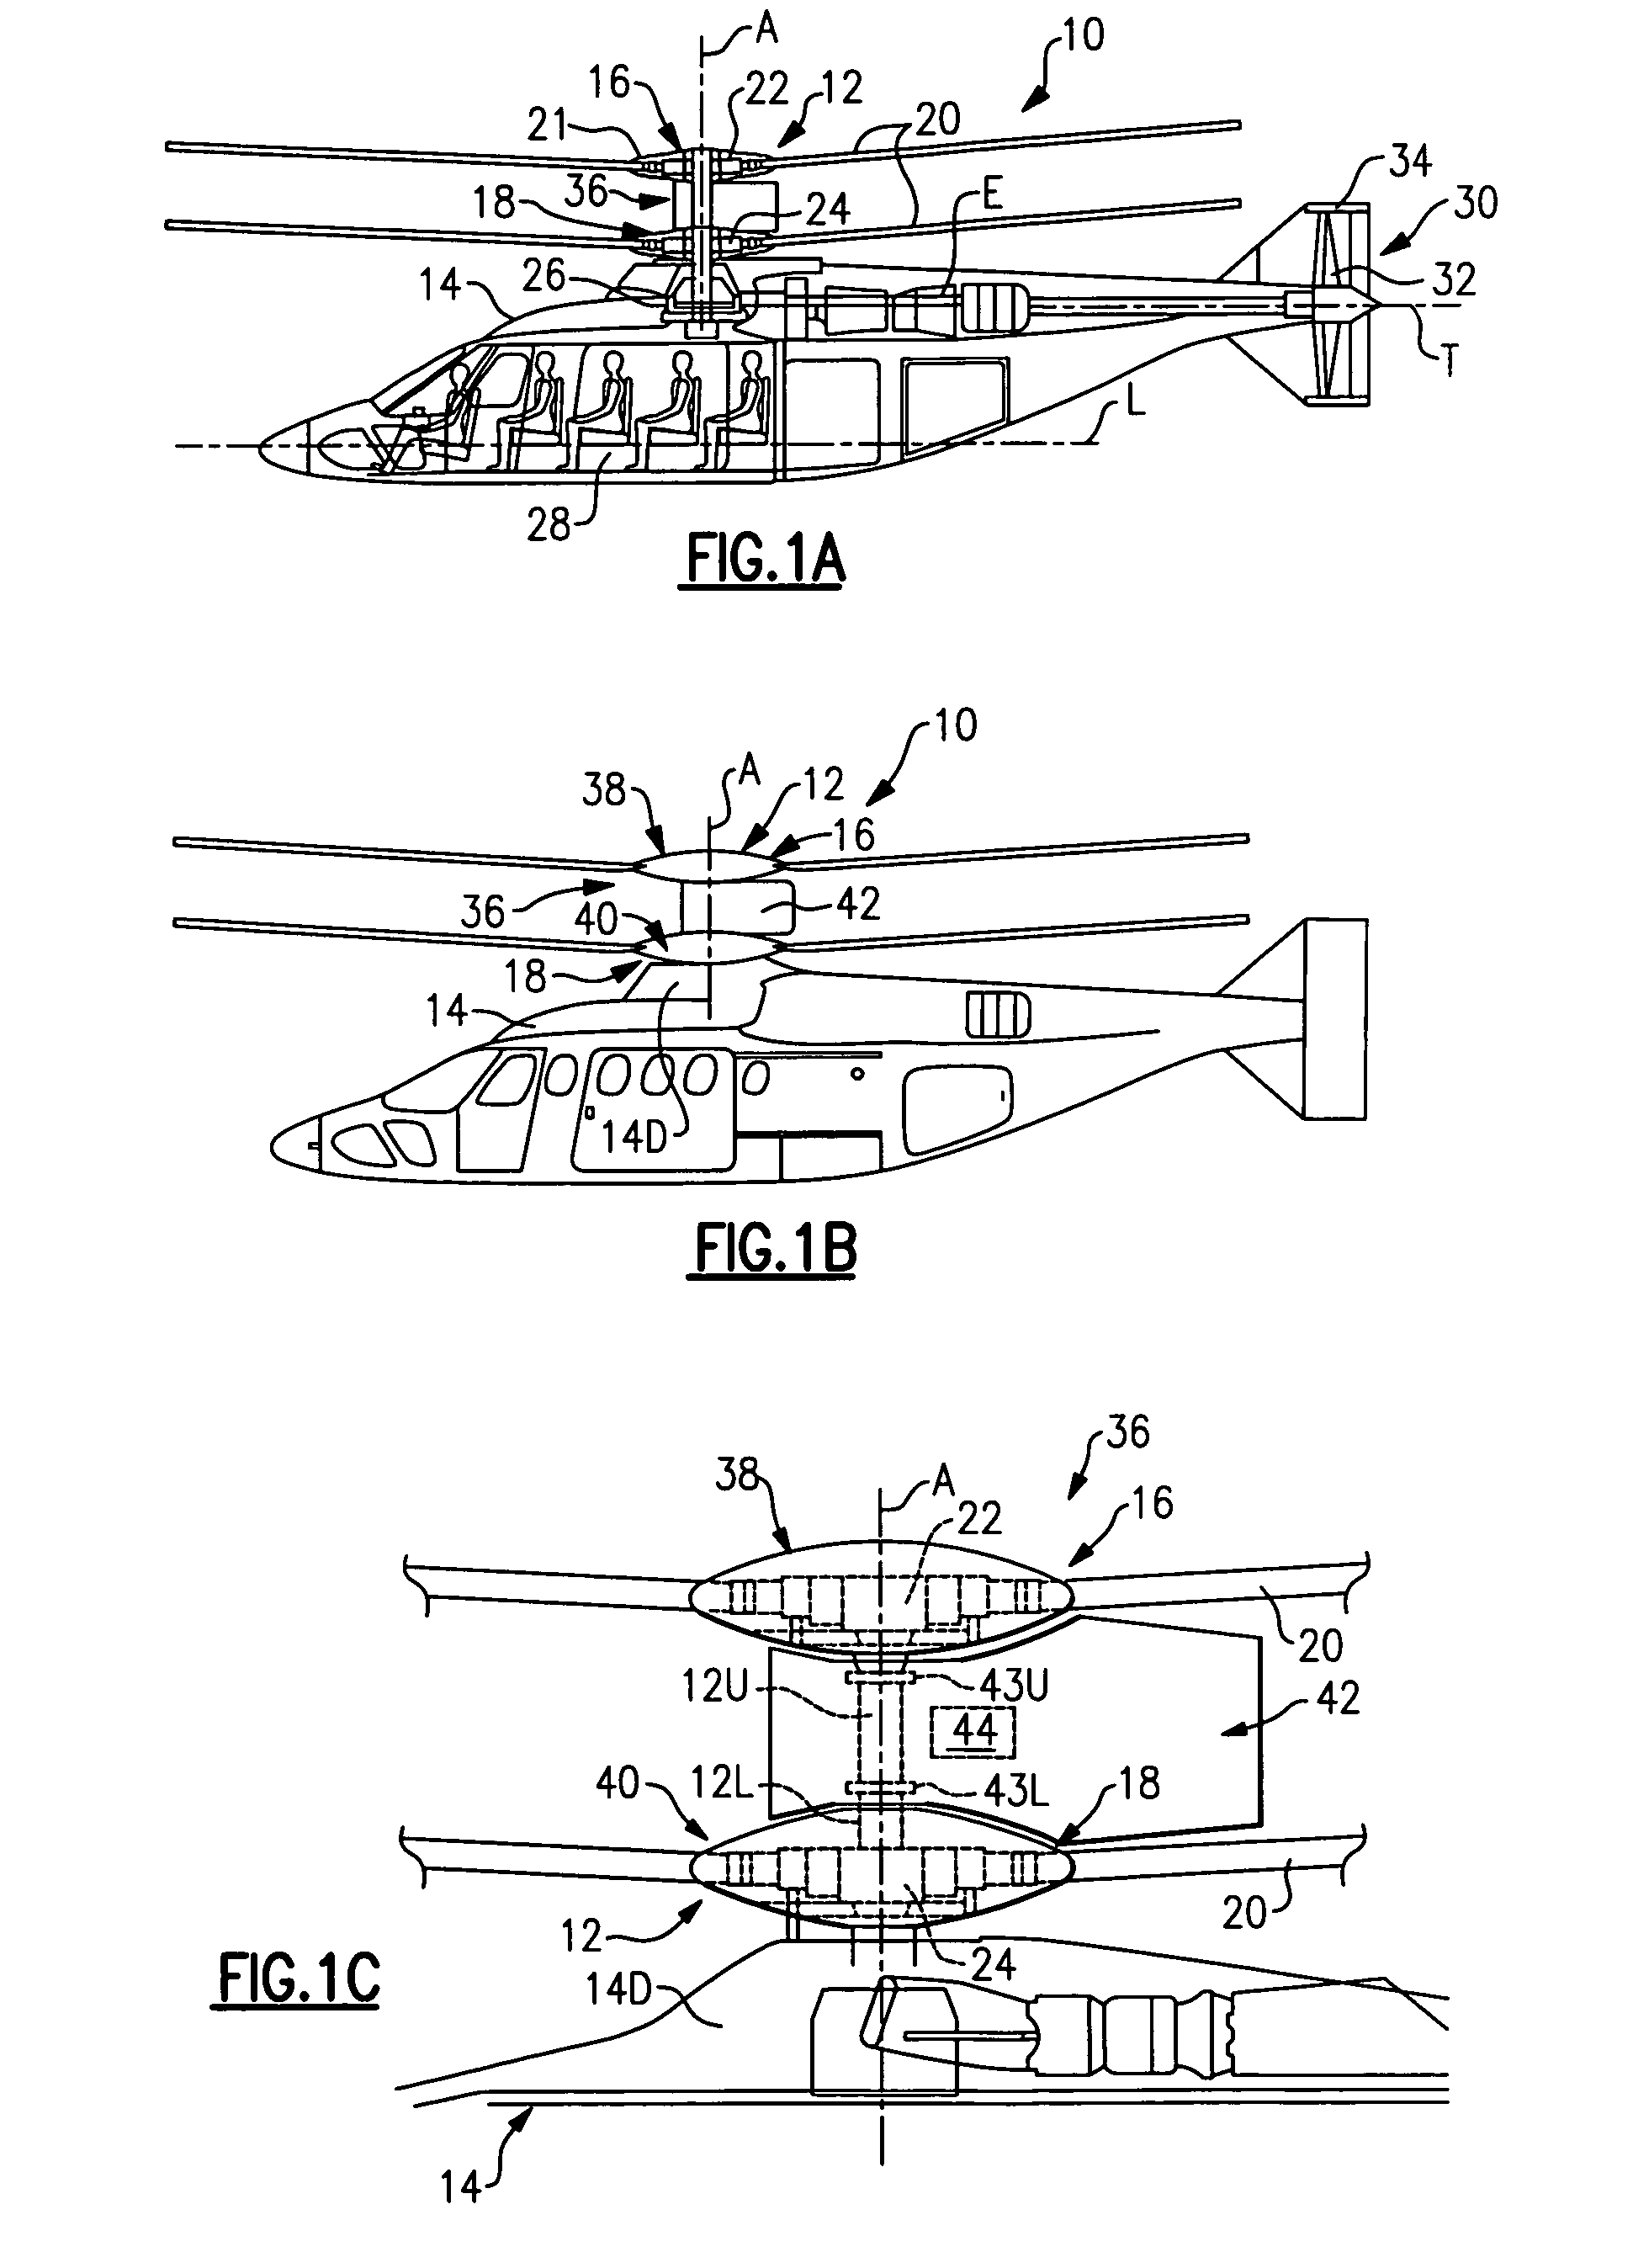 De-rotation system for a counter-rotating, coaxial rotor hub shaft fairing